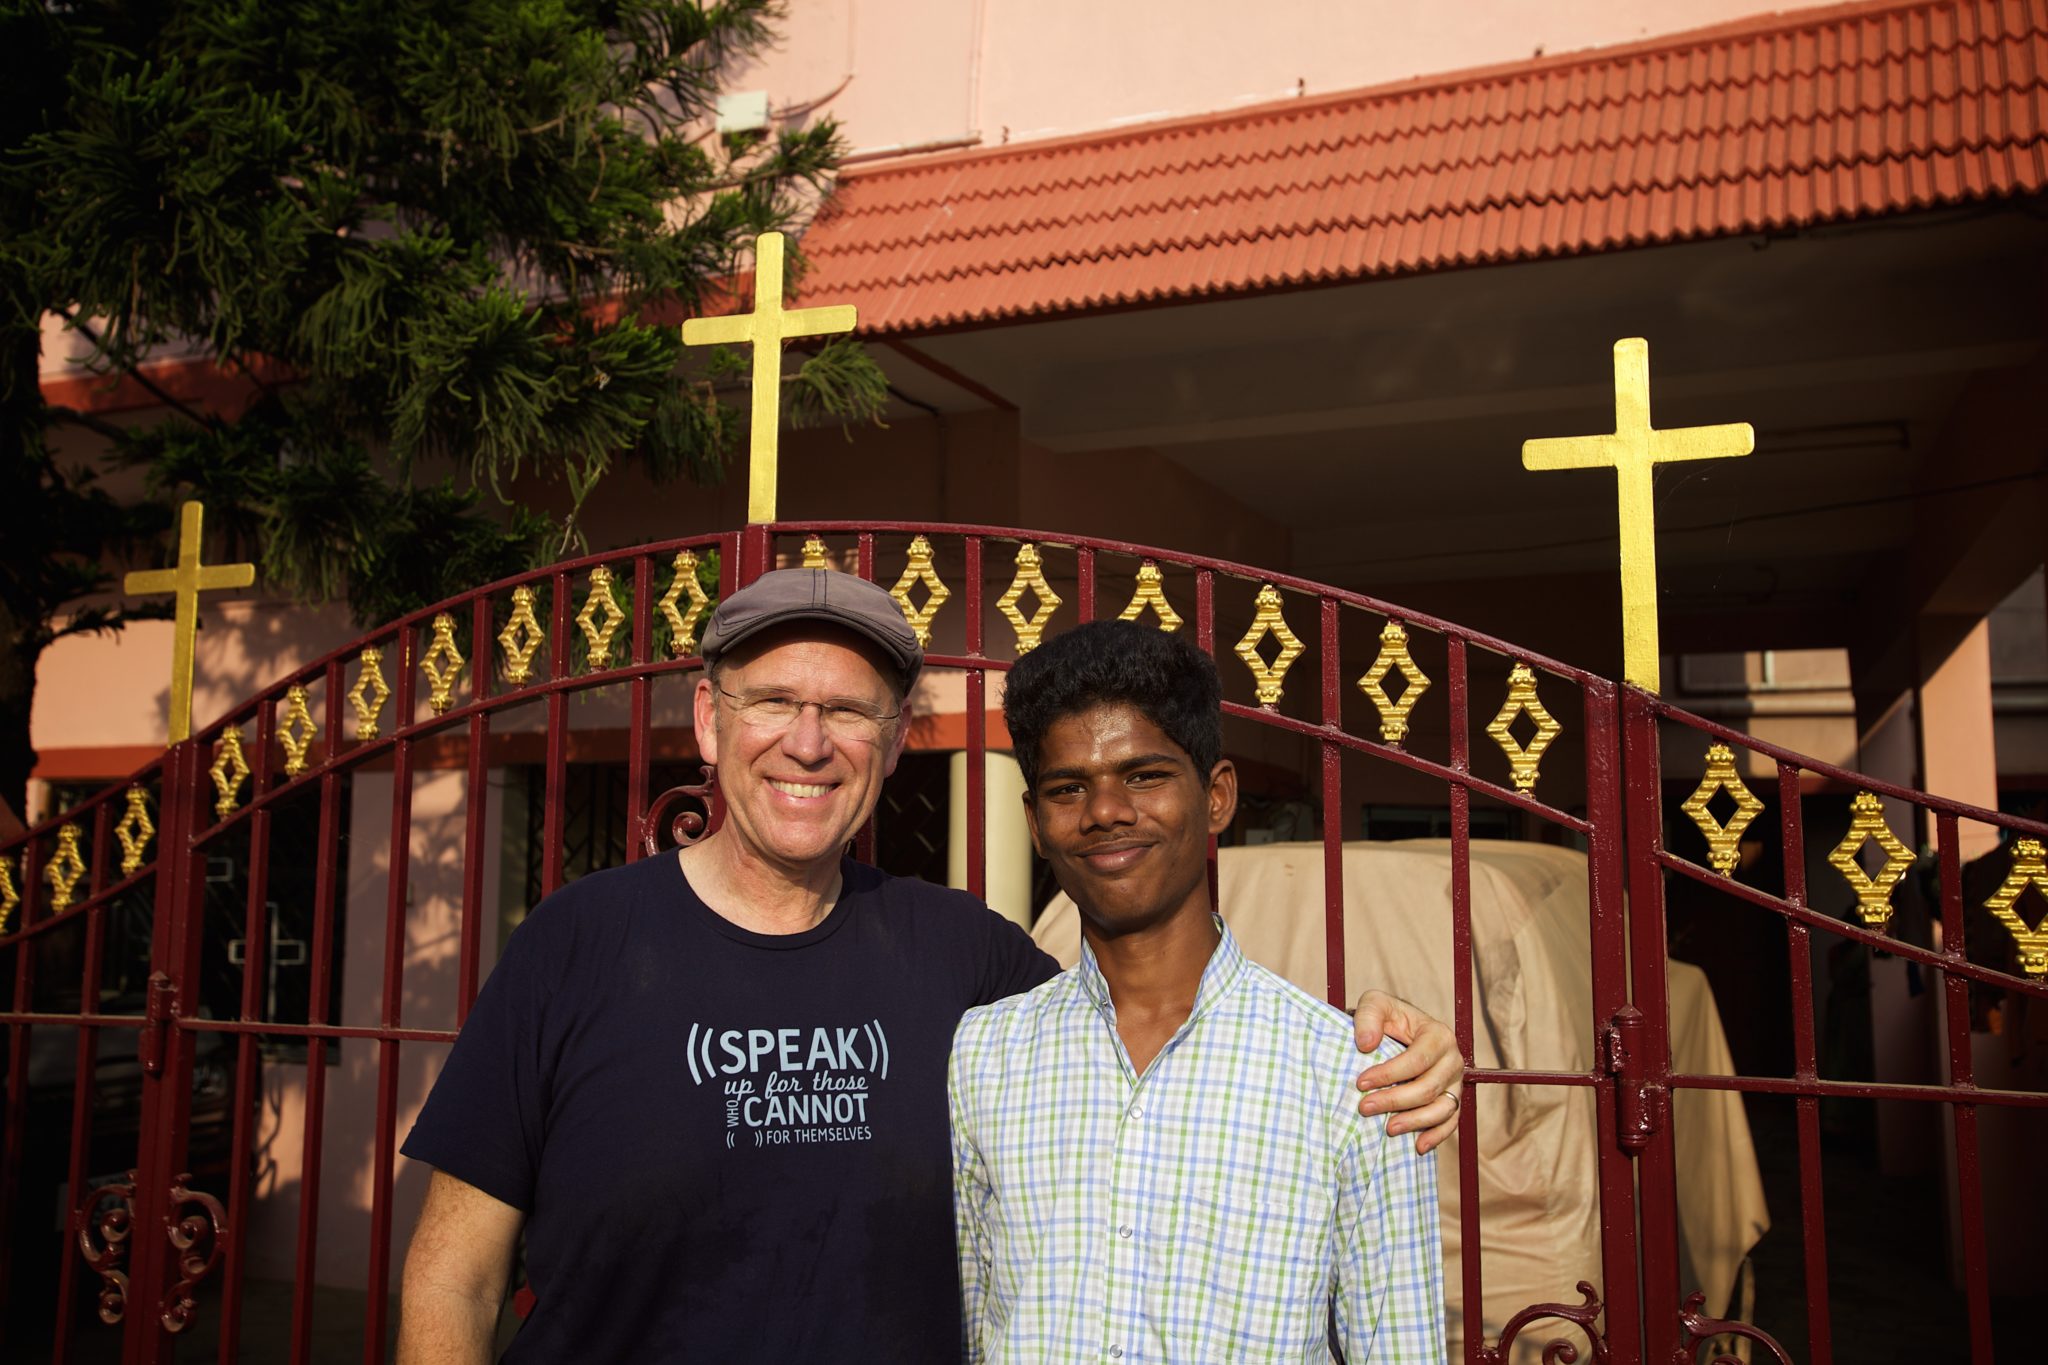 Photo with Sathish during my visit this year to see him in India.